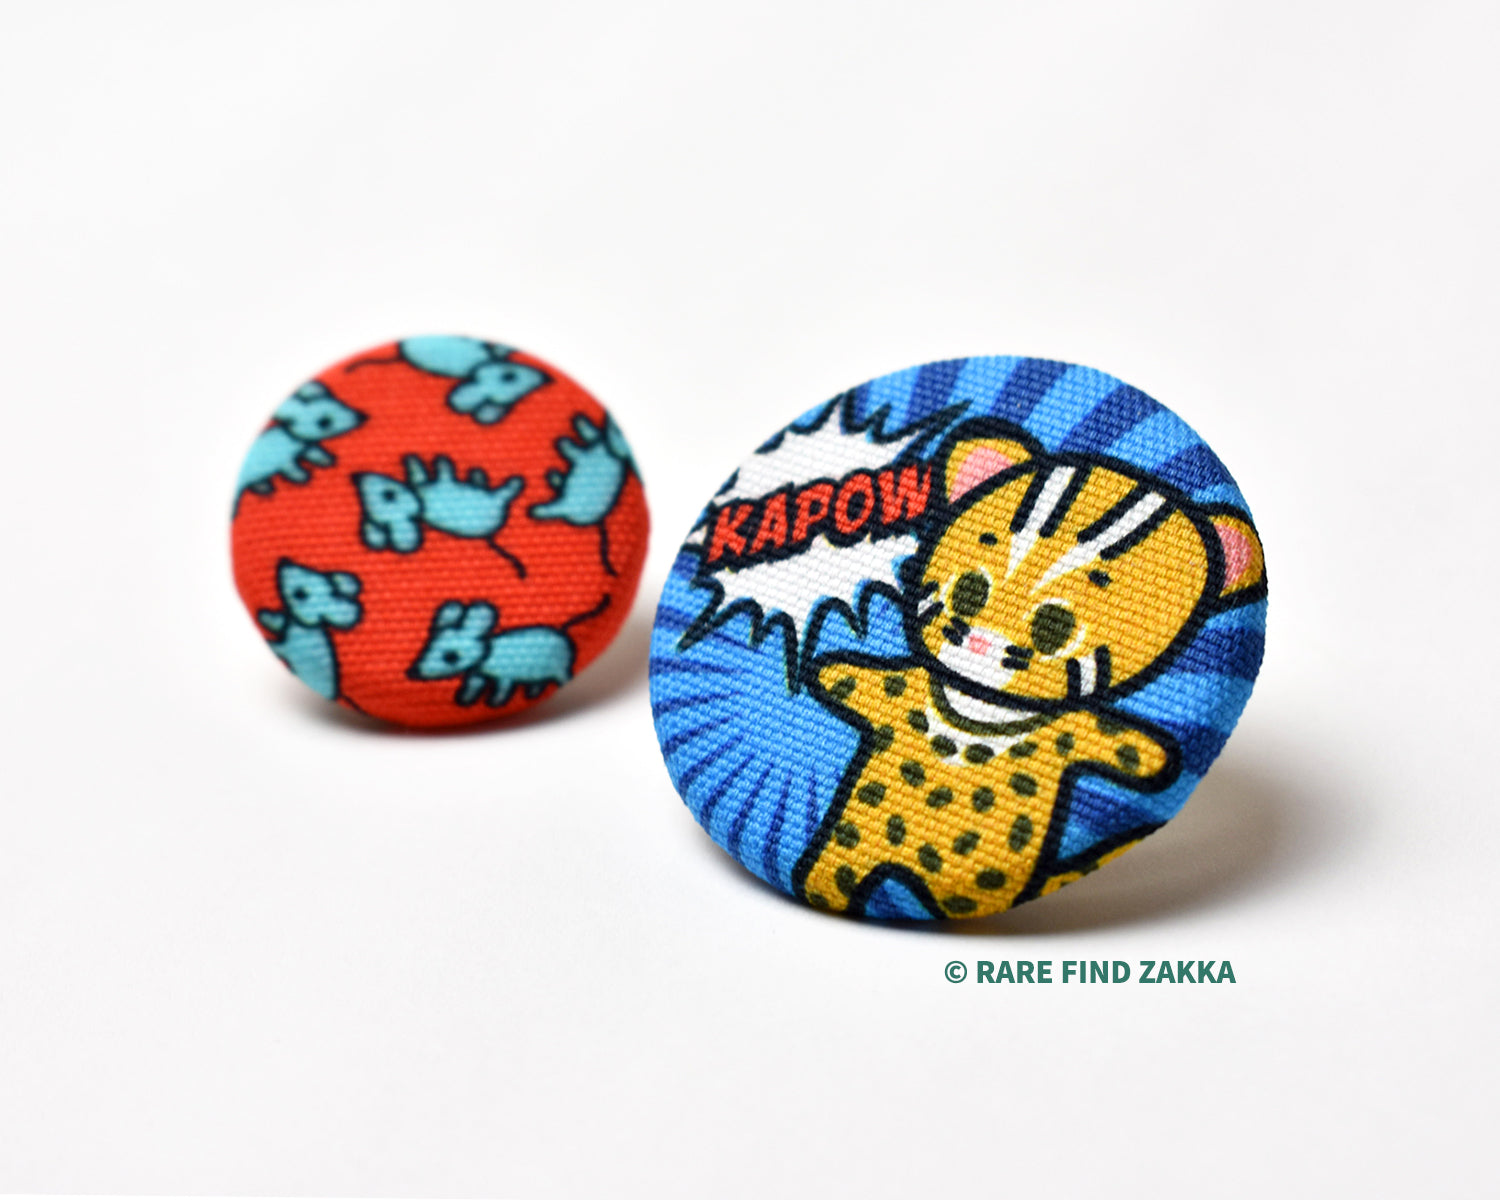 Cute leopard cat blue badge and Mouses red badge hand made in japan